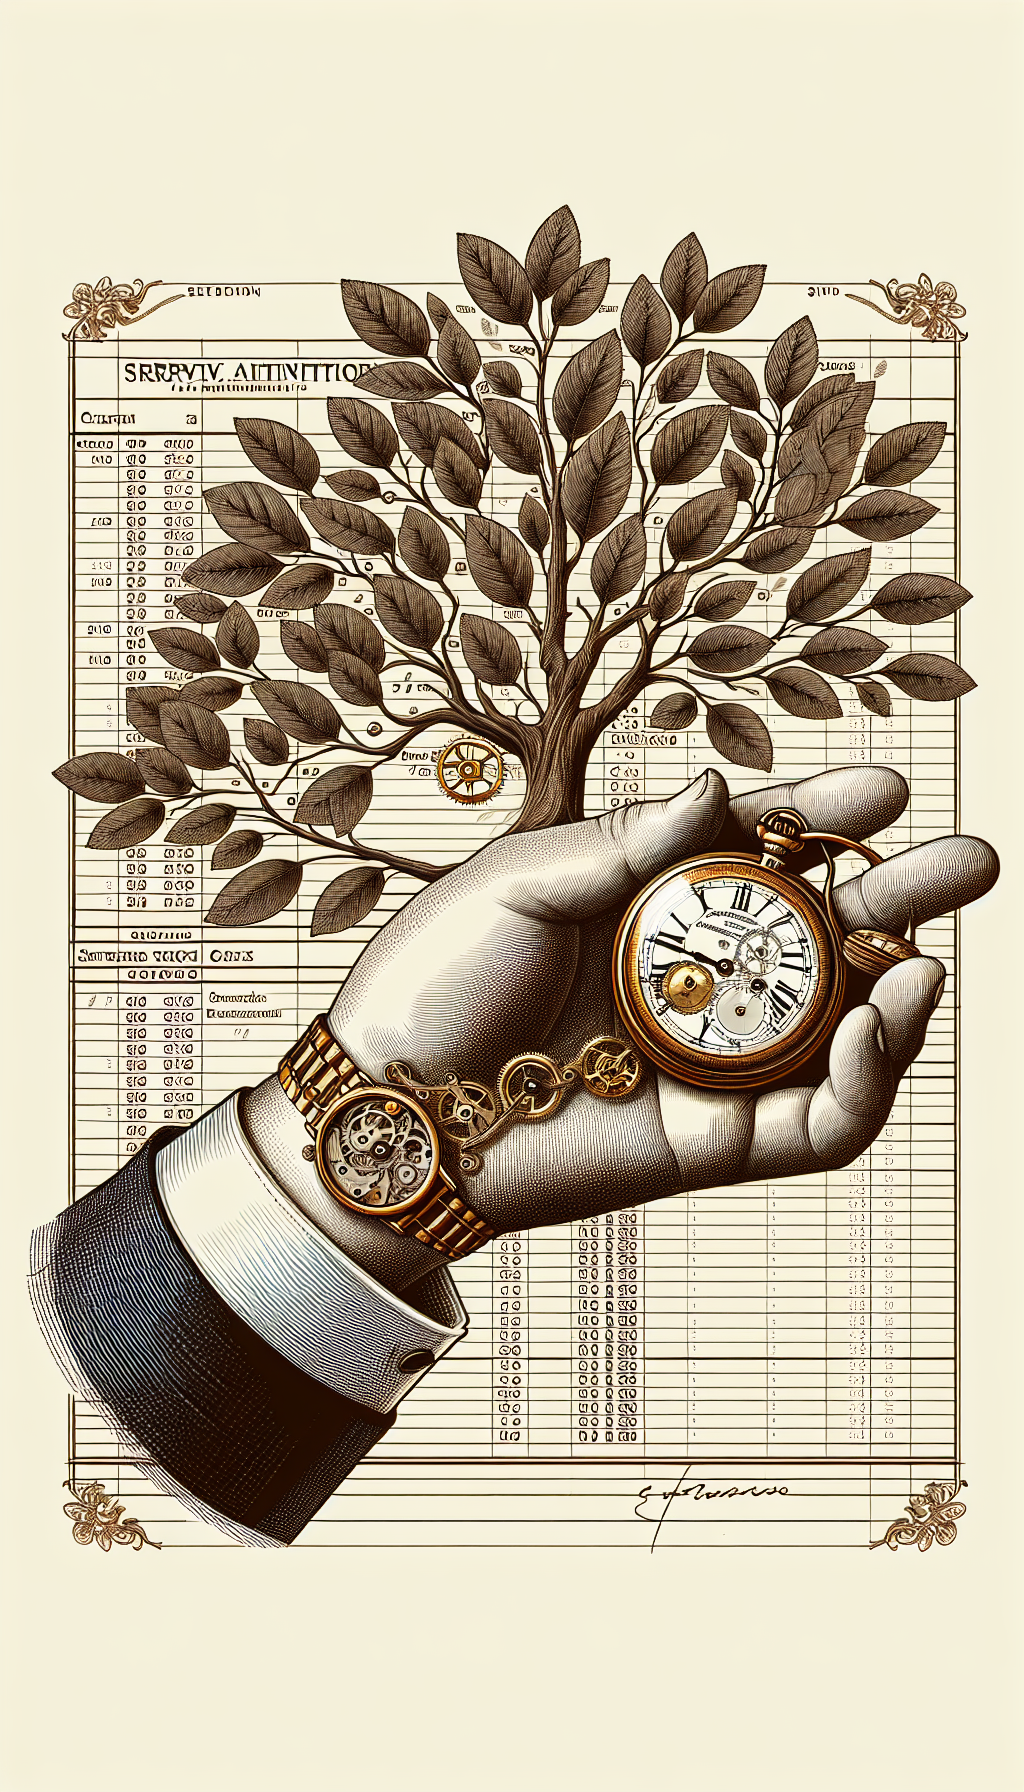 An illustration depicts a distinguished hand holding an intricate old Croton watch, with gears visible, symbolizing its inner workings. Above, a tree of paper service receipts blossoms, each leaf stamped with maintenance dates. The background subtly camouflages a ledger, hinting at the watch's provenance, reinforcing the narrative of careful upkeep enhancing the timepiece's value. Styles vary from photo-realism for the watch to stylized vector art for the tree.